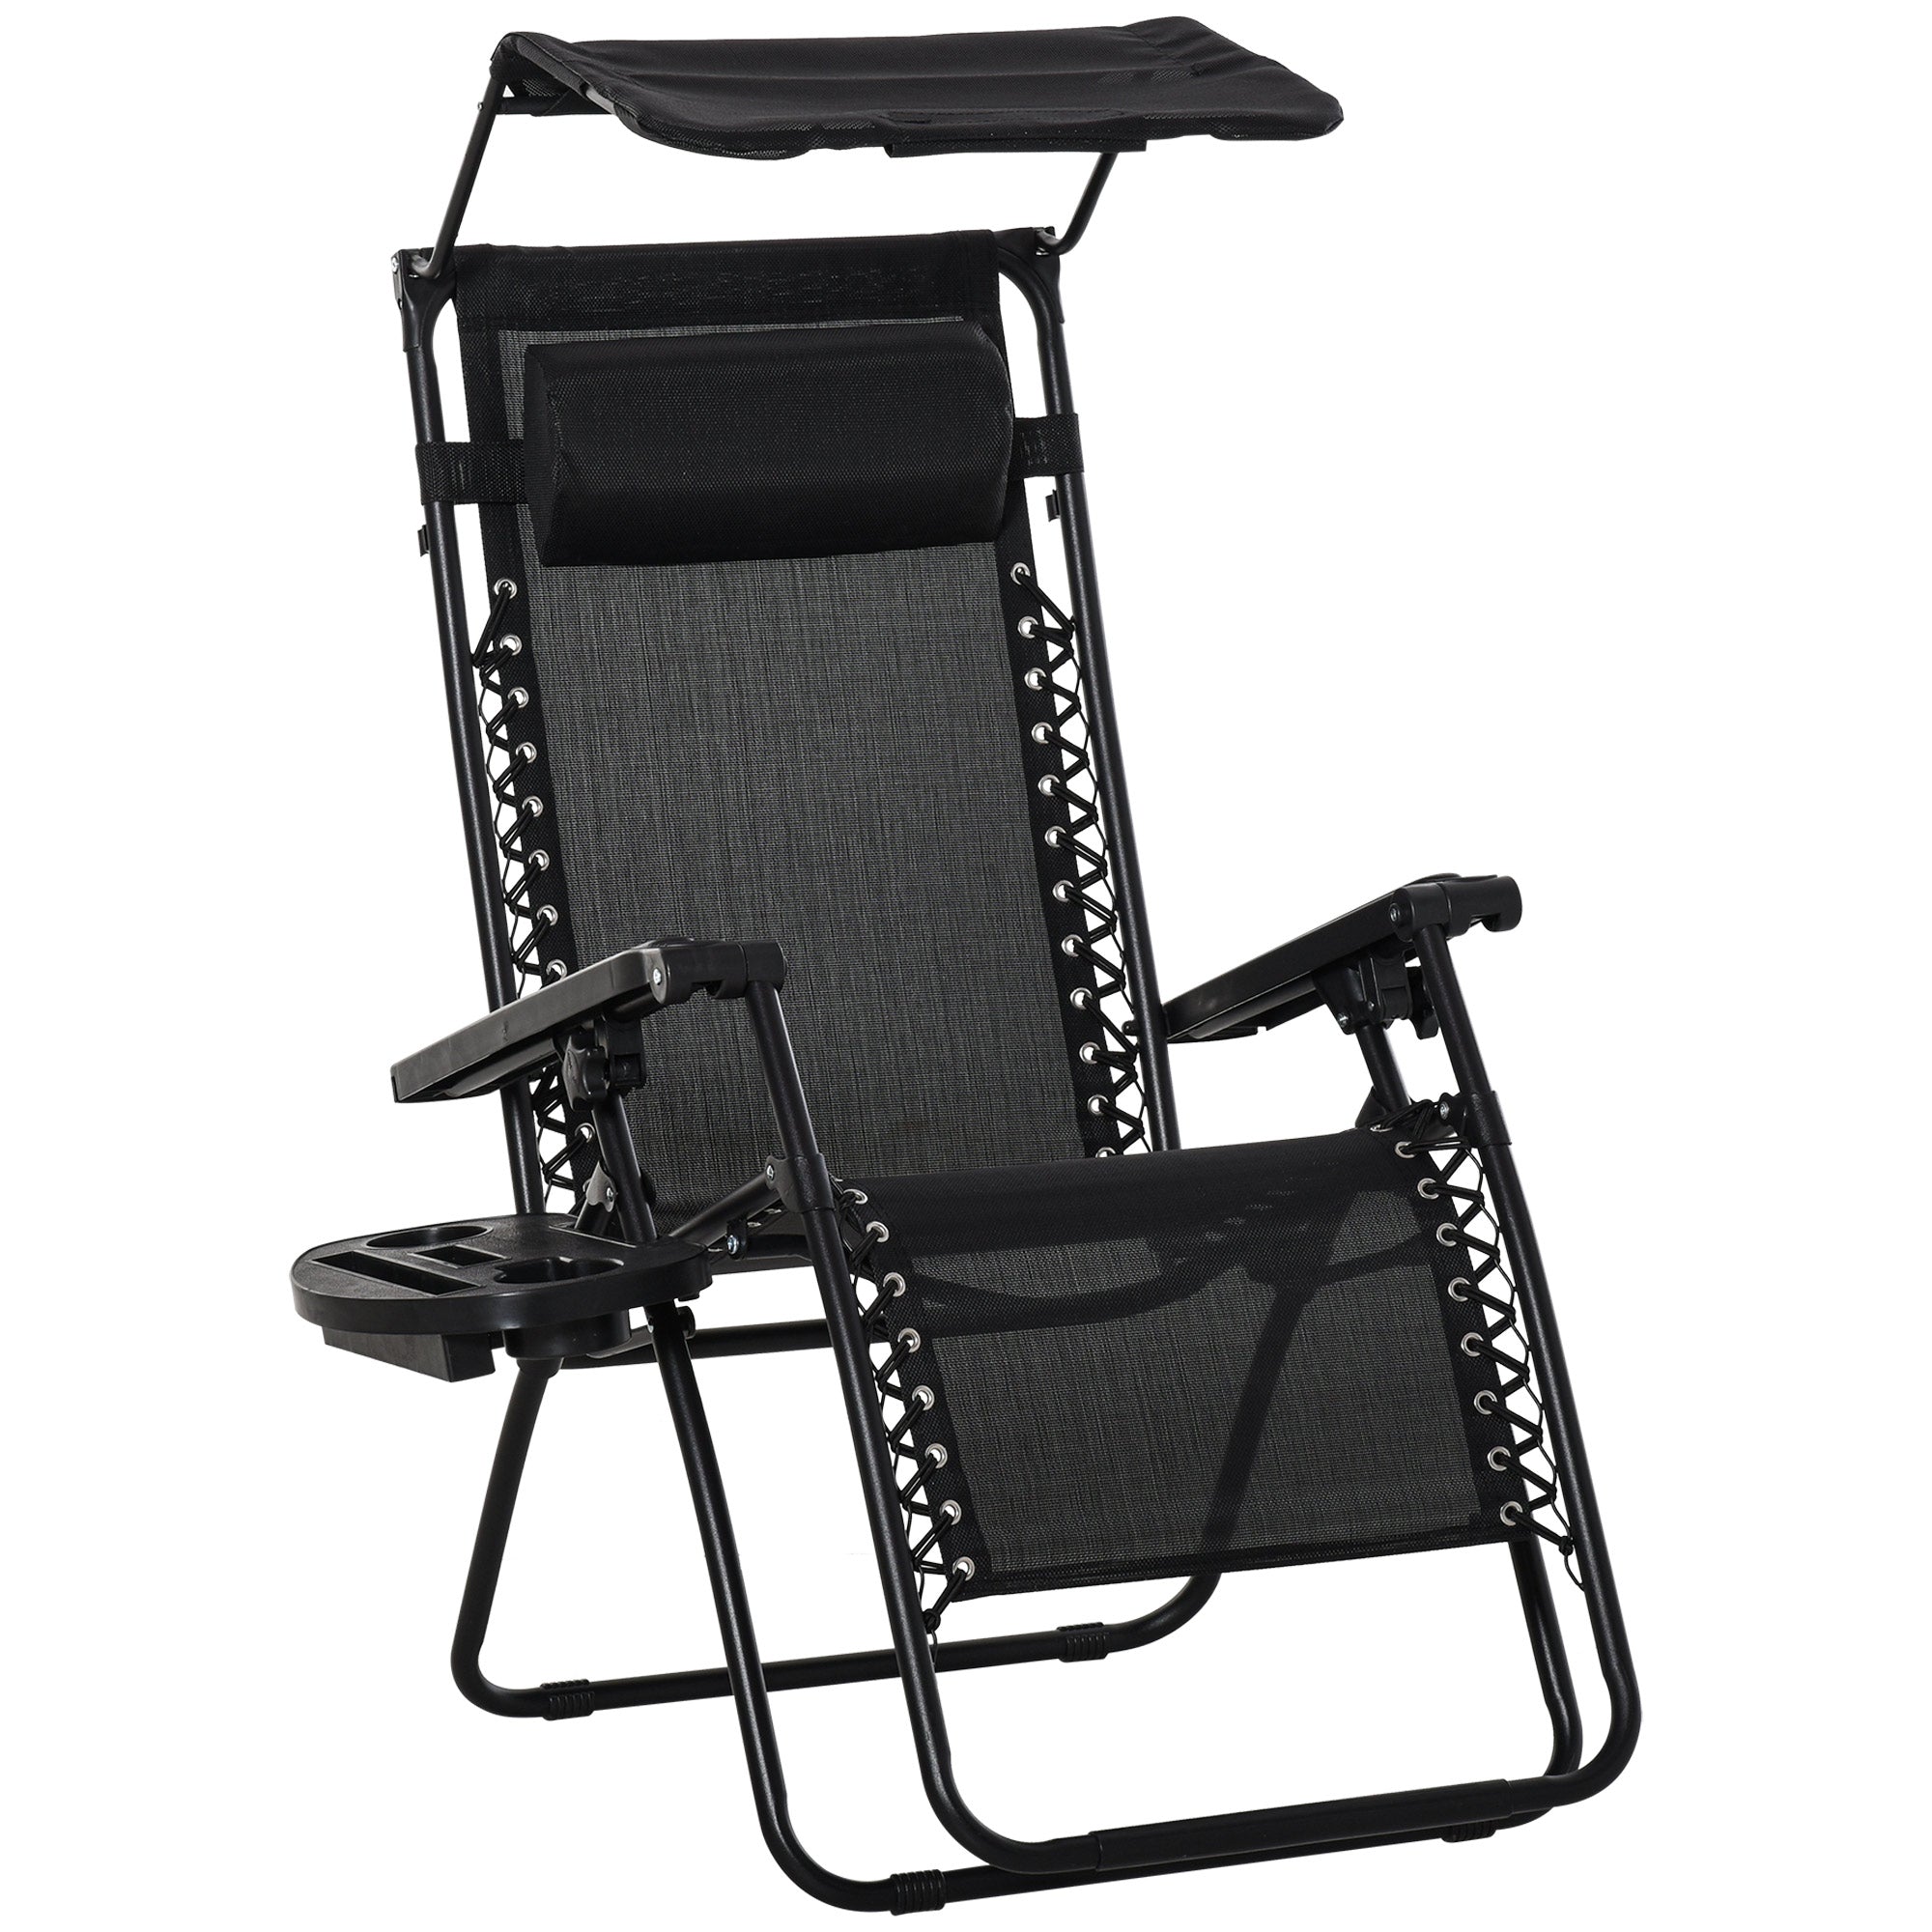 Zero Gravity Garden Deck Folding Chair Patio Sun Lounger Reclining Seat with Cup Holder & Canopy Shade - Black-0